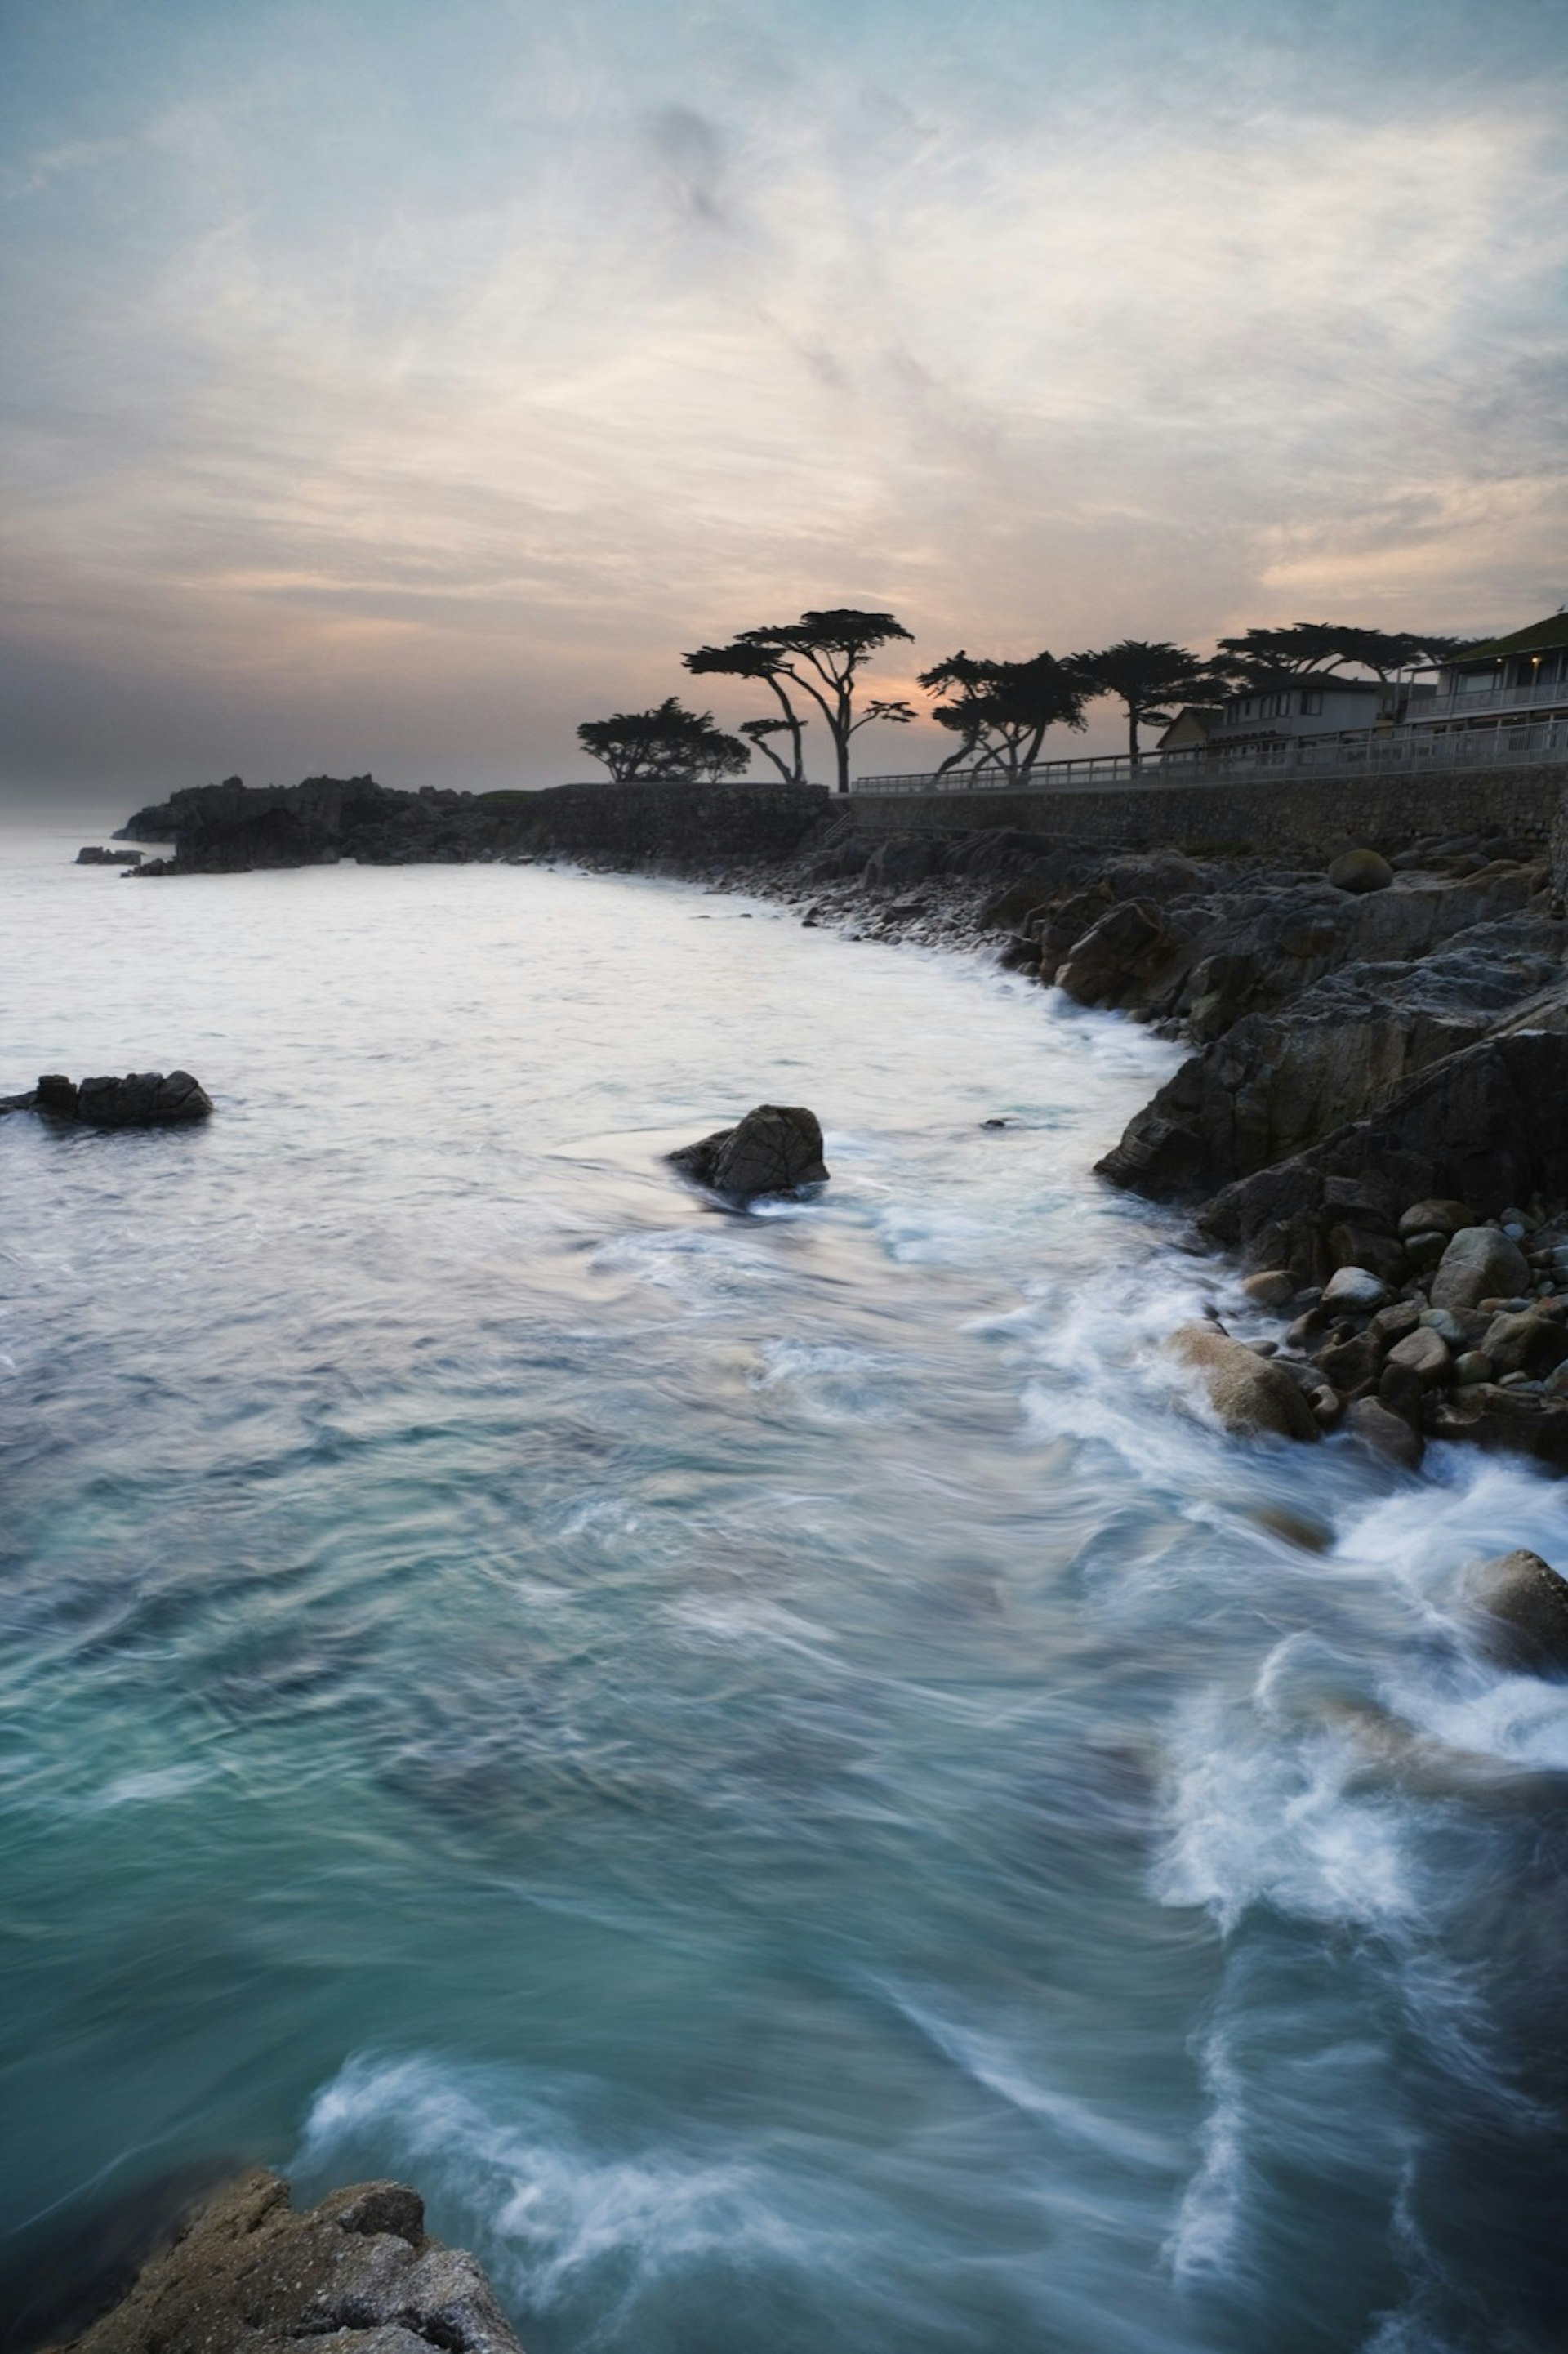 Waves crash on a rocky shore with the sun rising over cypress trees and a rocky peninsula